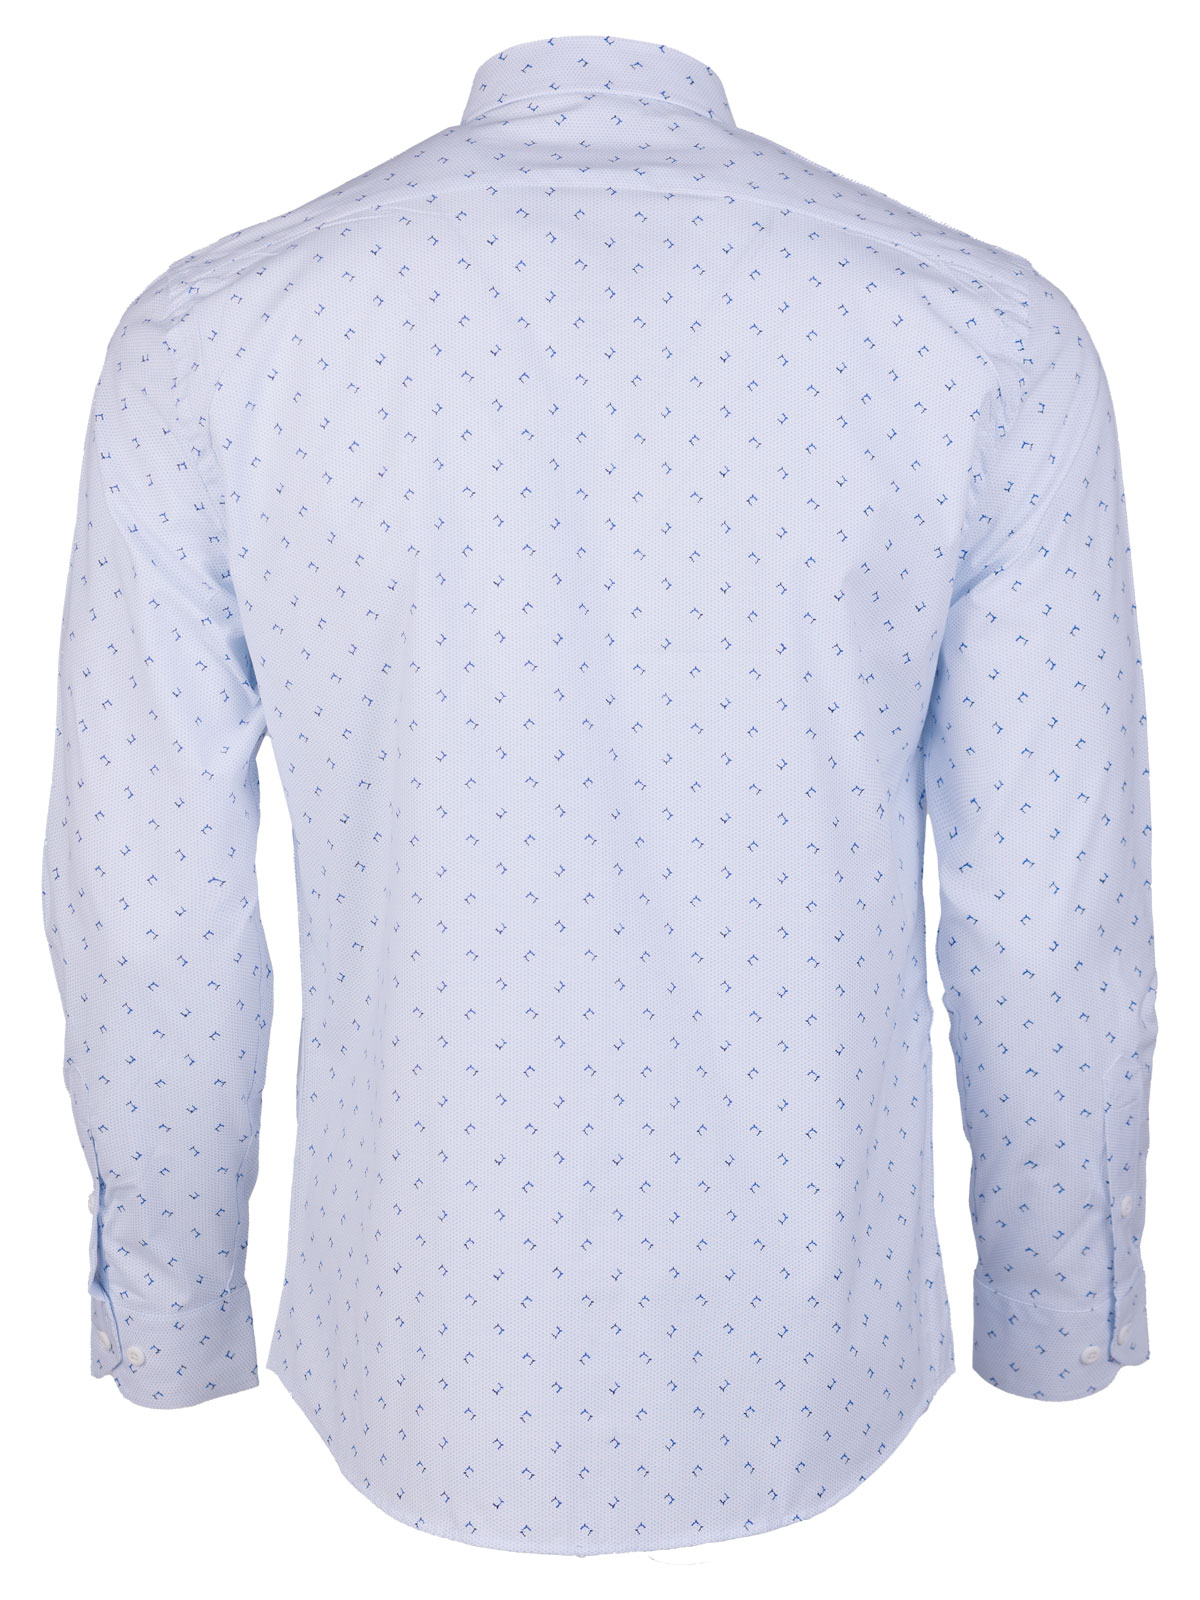 White shirt with light blue figures - 21601 € 44.43 img2